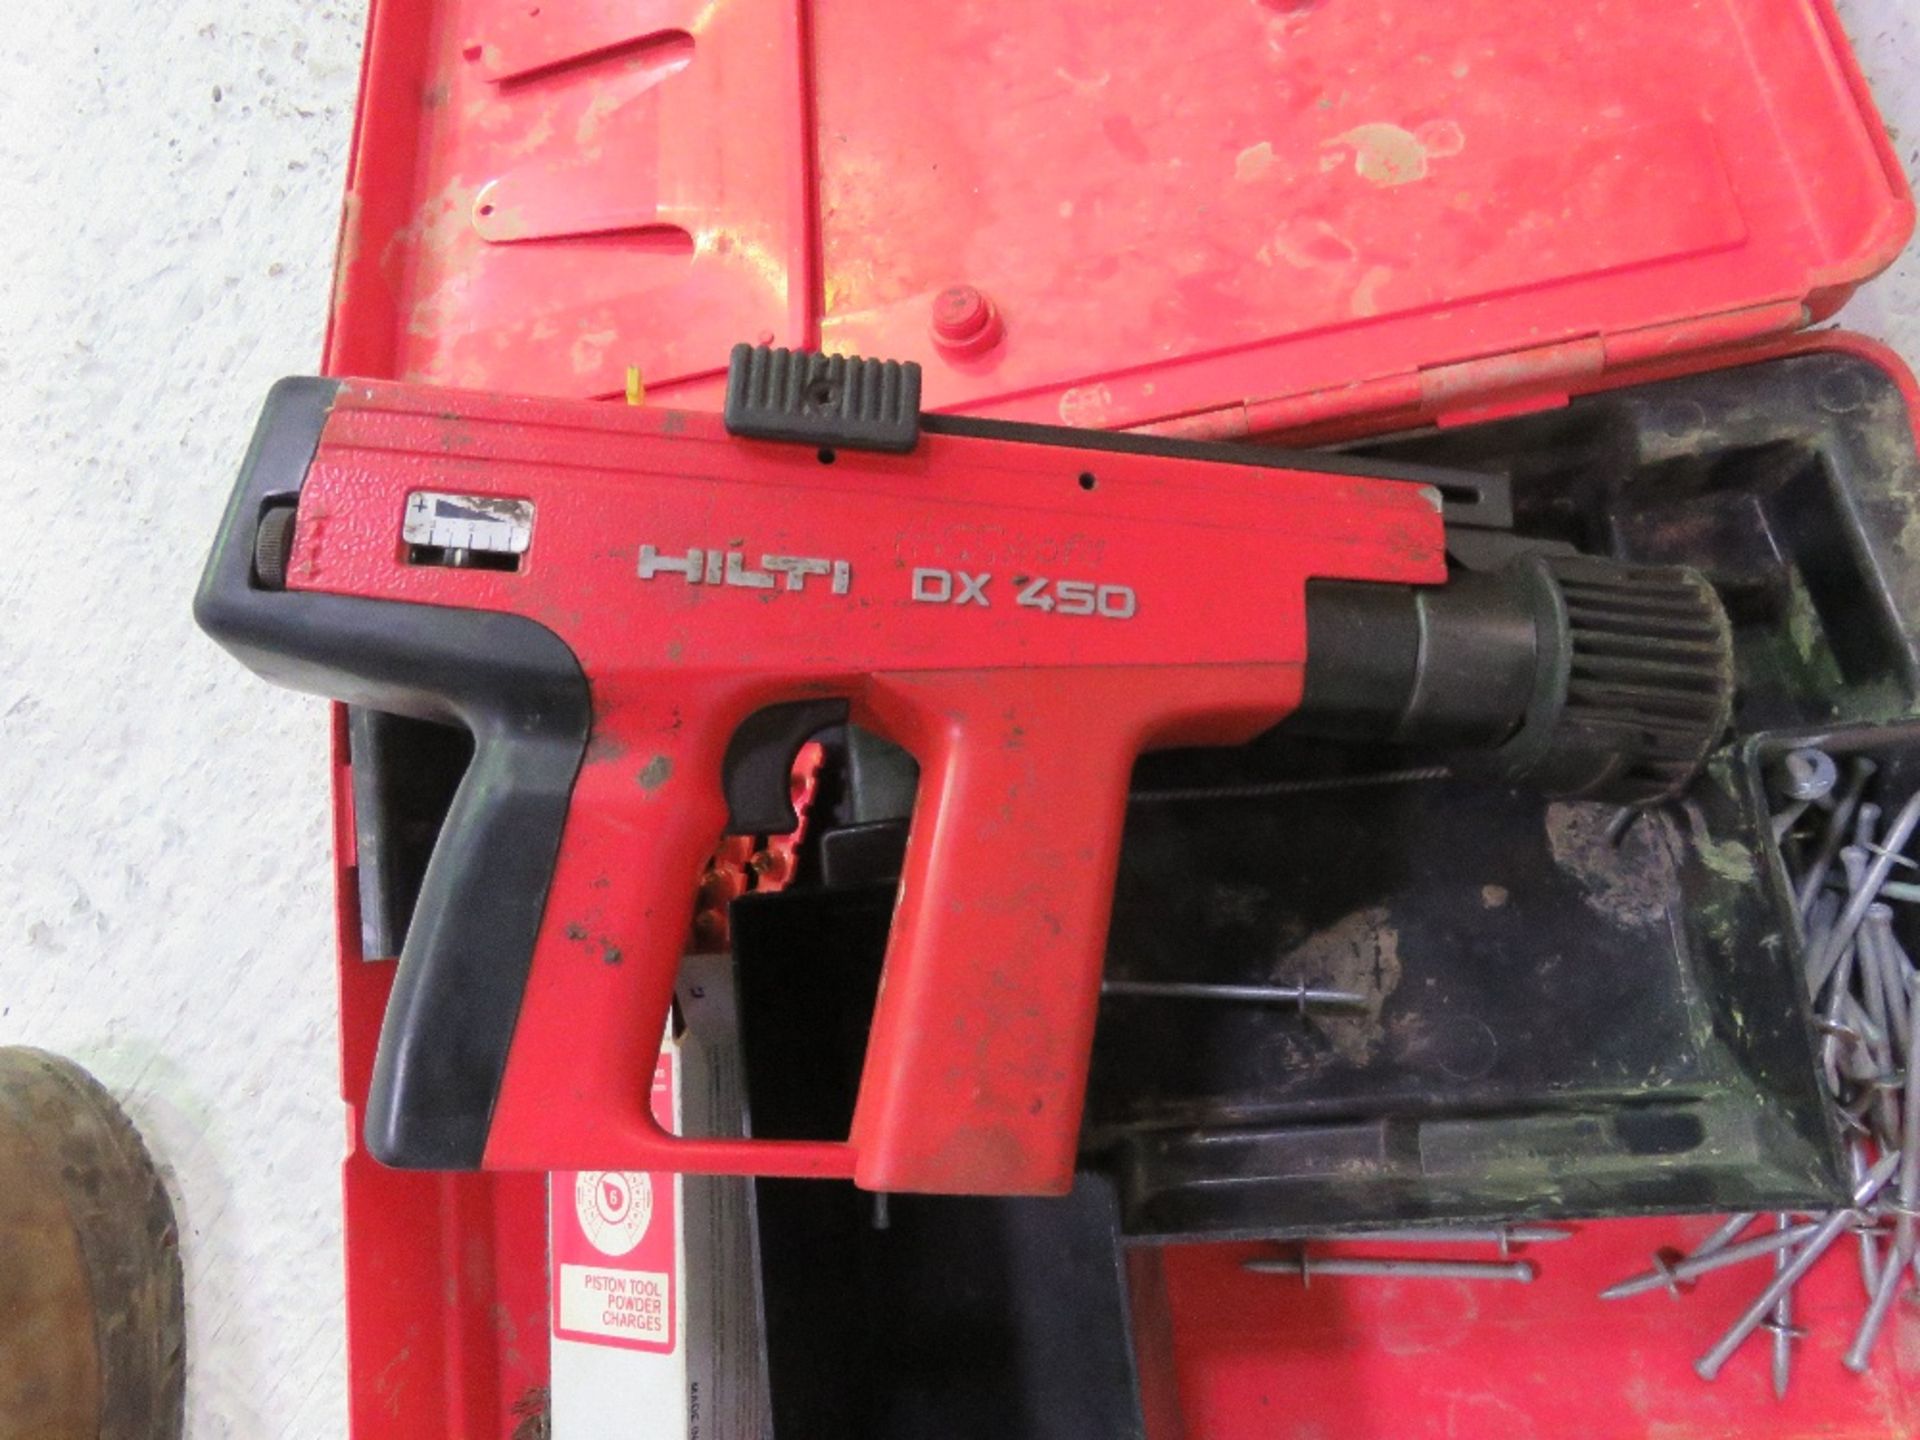 2 X HILTI DX450 NAIL GUNS. DIRECT FROM LOCAL RETIRING BUILDER. THIS LOT IS SOLD UNDER THE AUCTI - Image 2 of 6